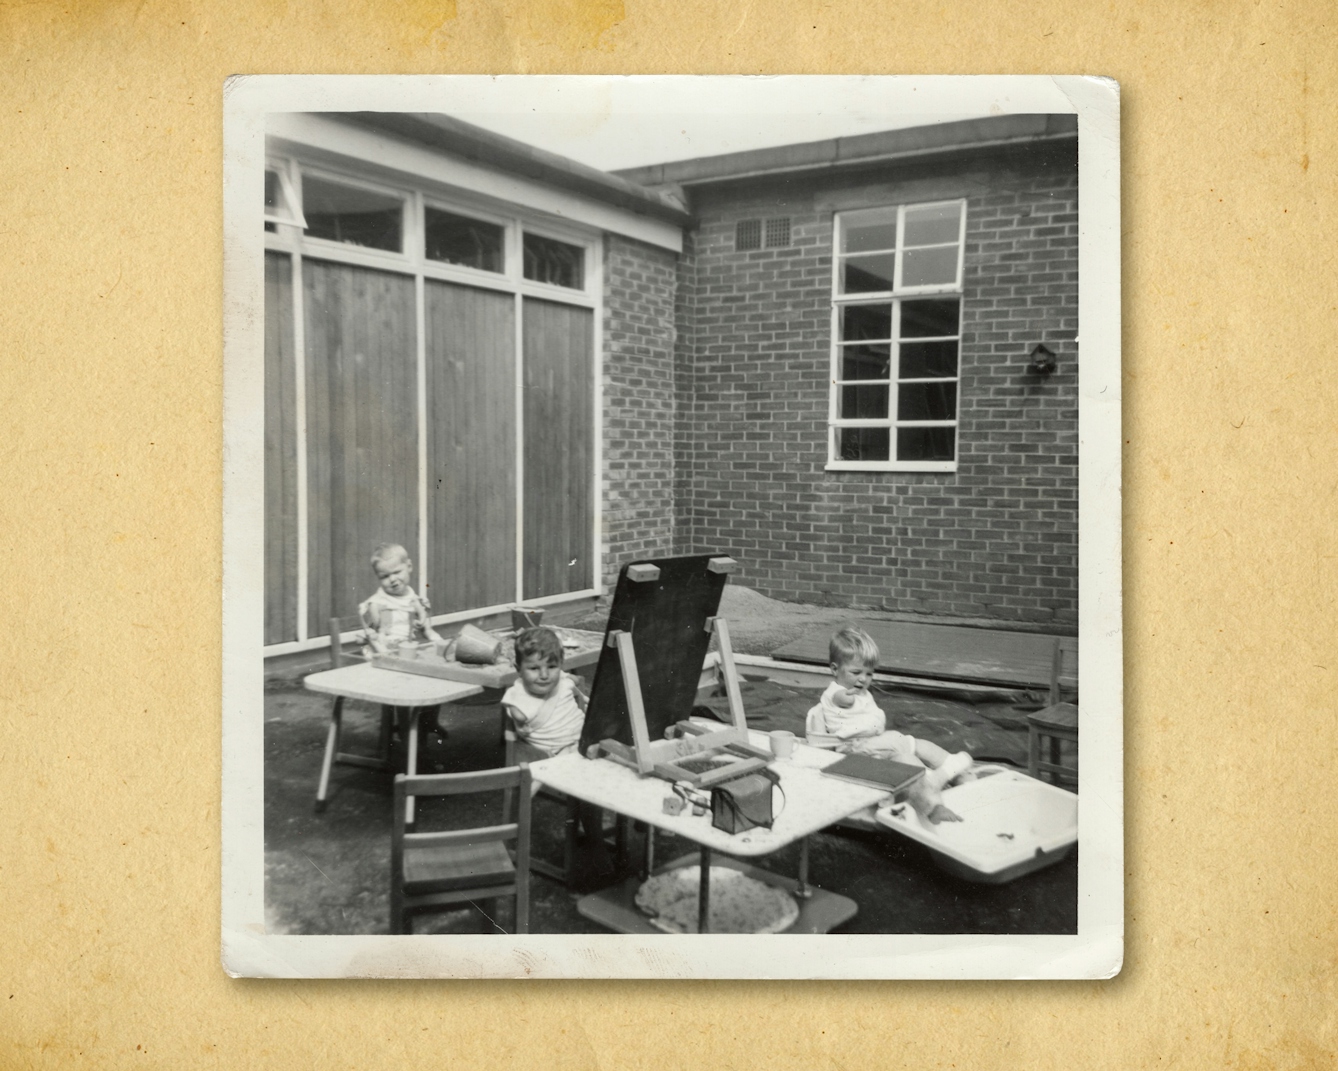 Photograph of a black and white photographic print, resting on a brown paper textured background. The print shows a group of 3 young children seated outside a school building, all engaged in an activity of drawing on a blackboard, playing in a sandpit or with a water. All the children have been affected by the thalidomide scandal and so some have short arms, some have short legs, and some have both.